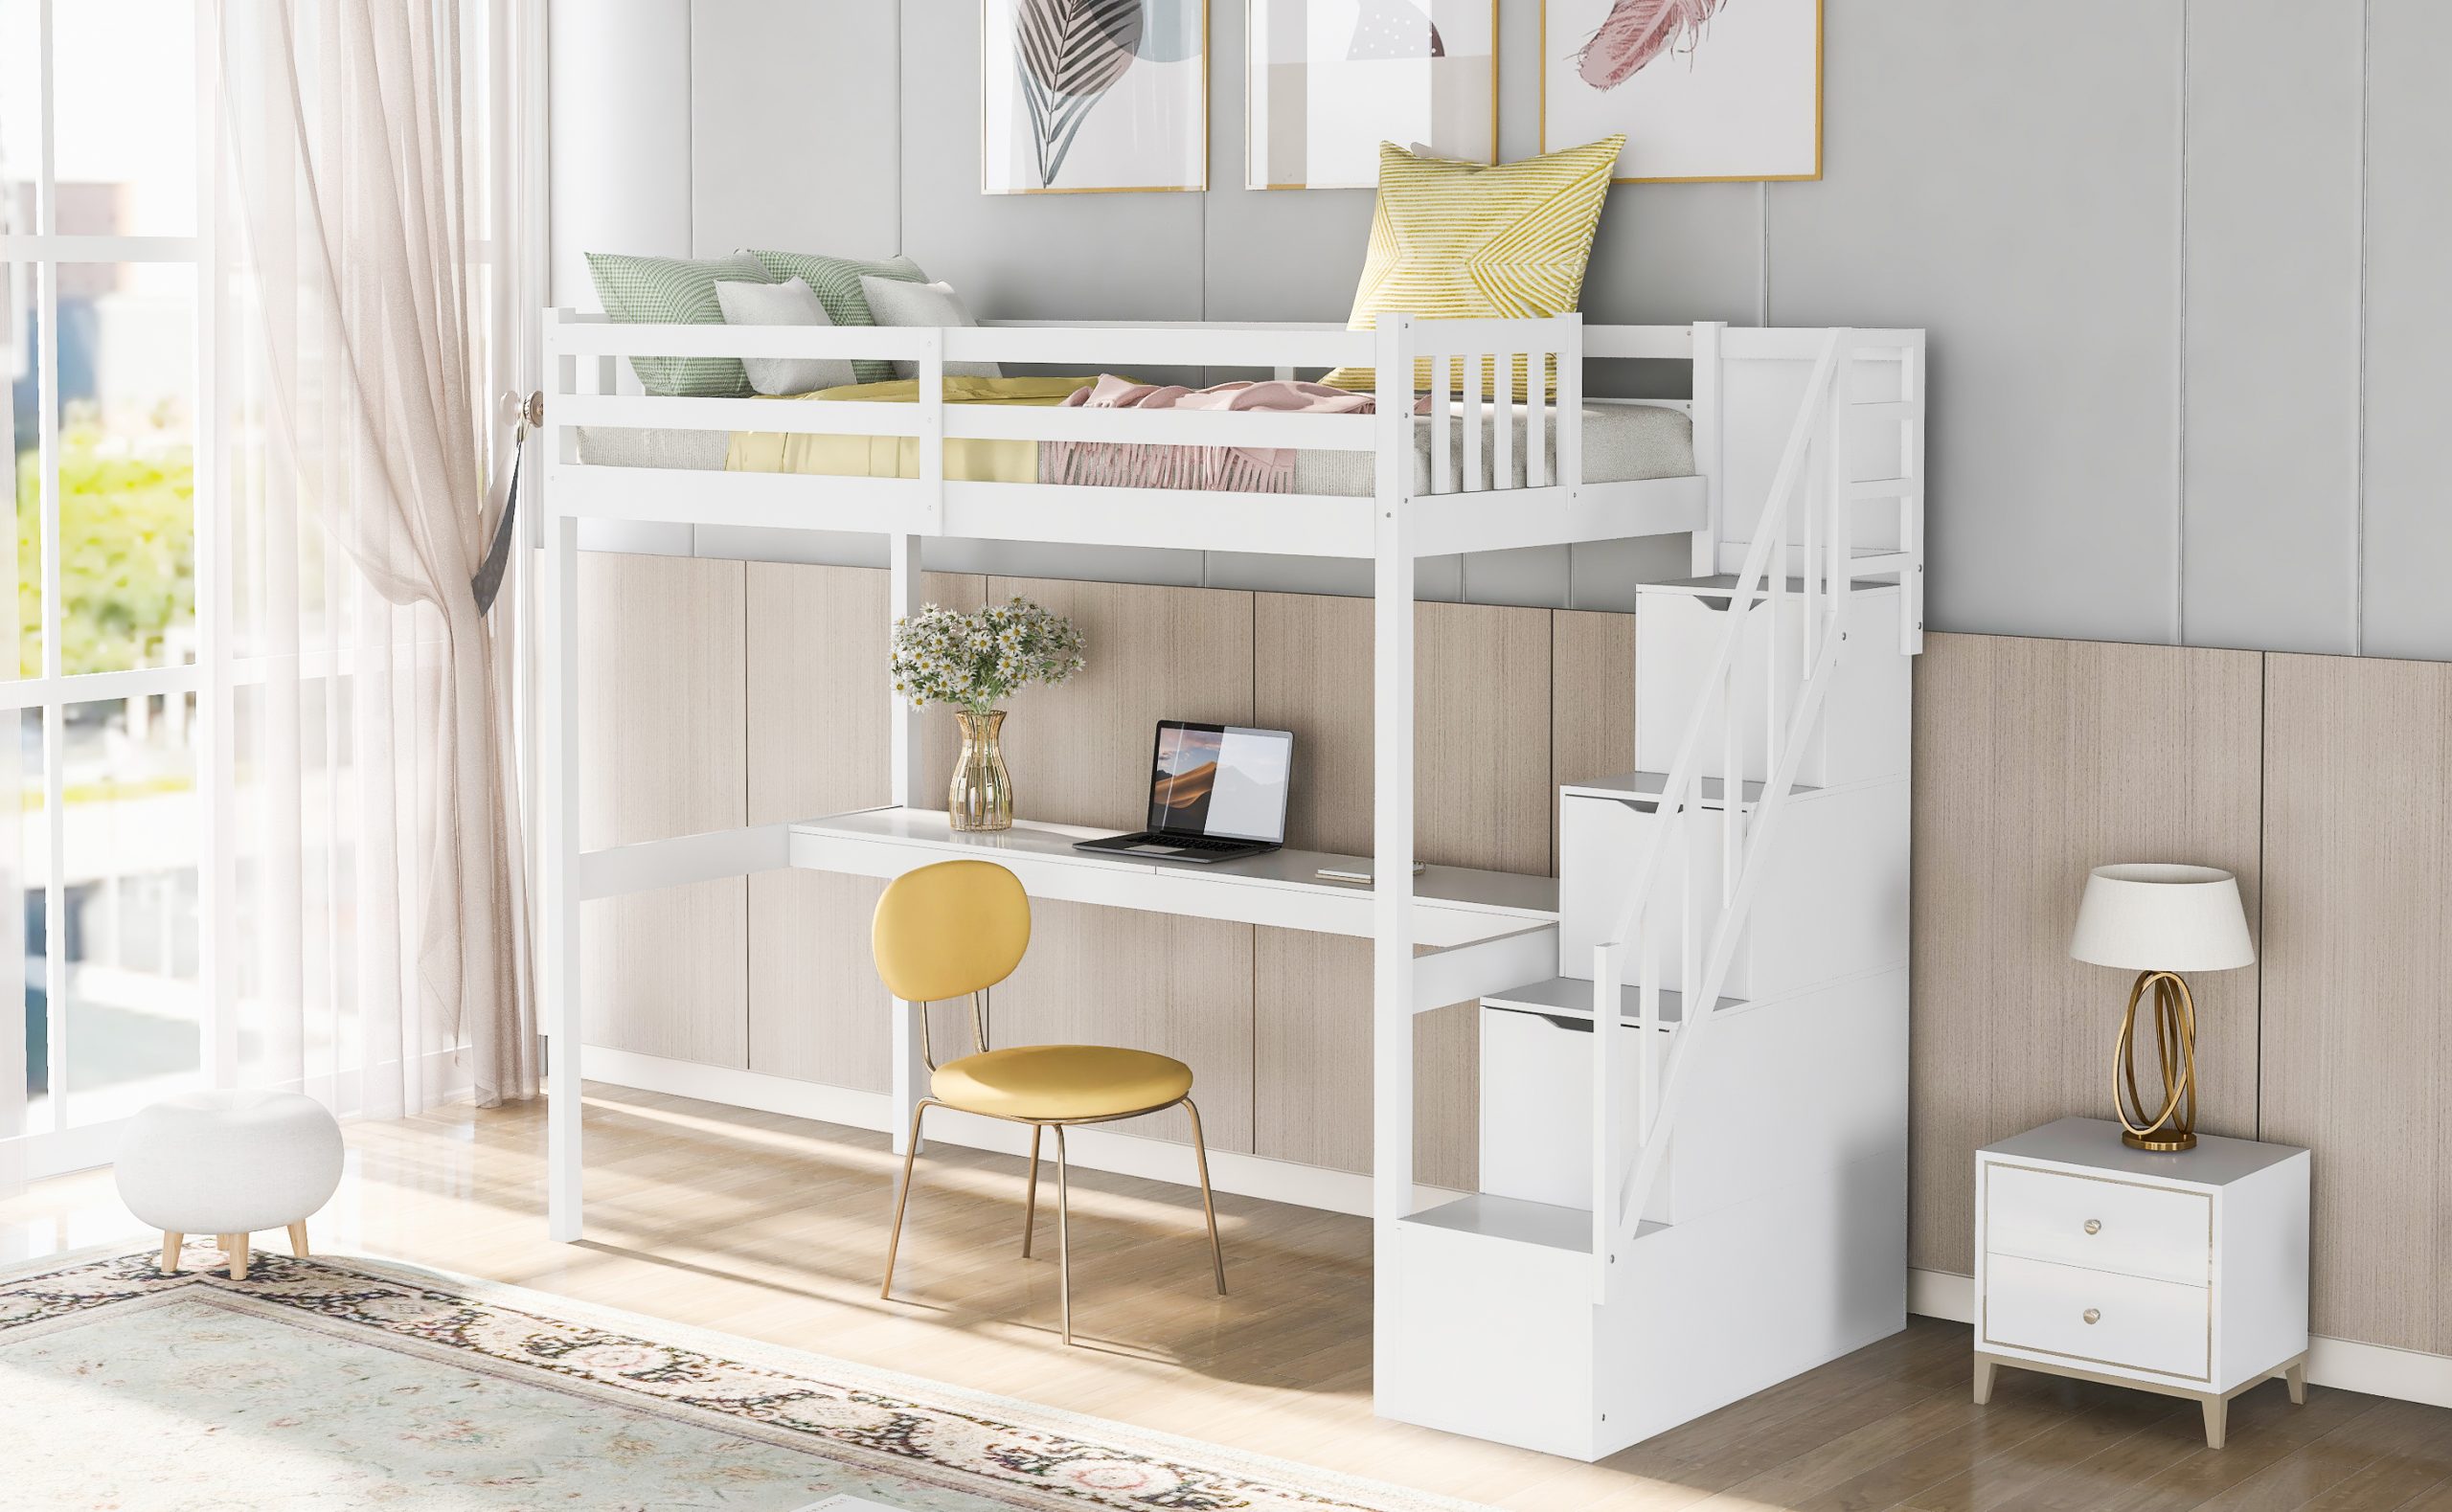 Twin Size Loft Bed With Staircase And Built-in Desk